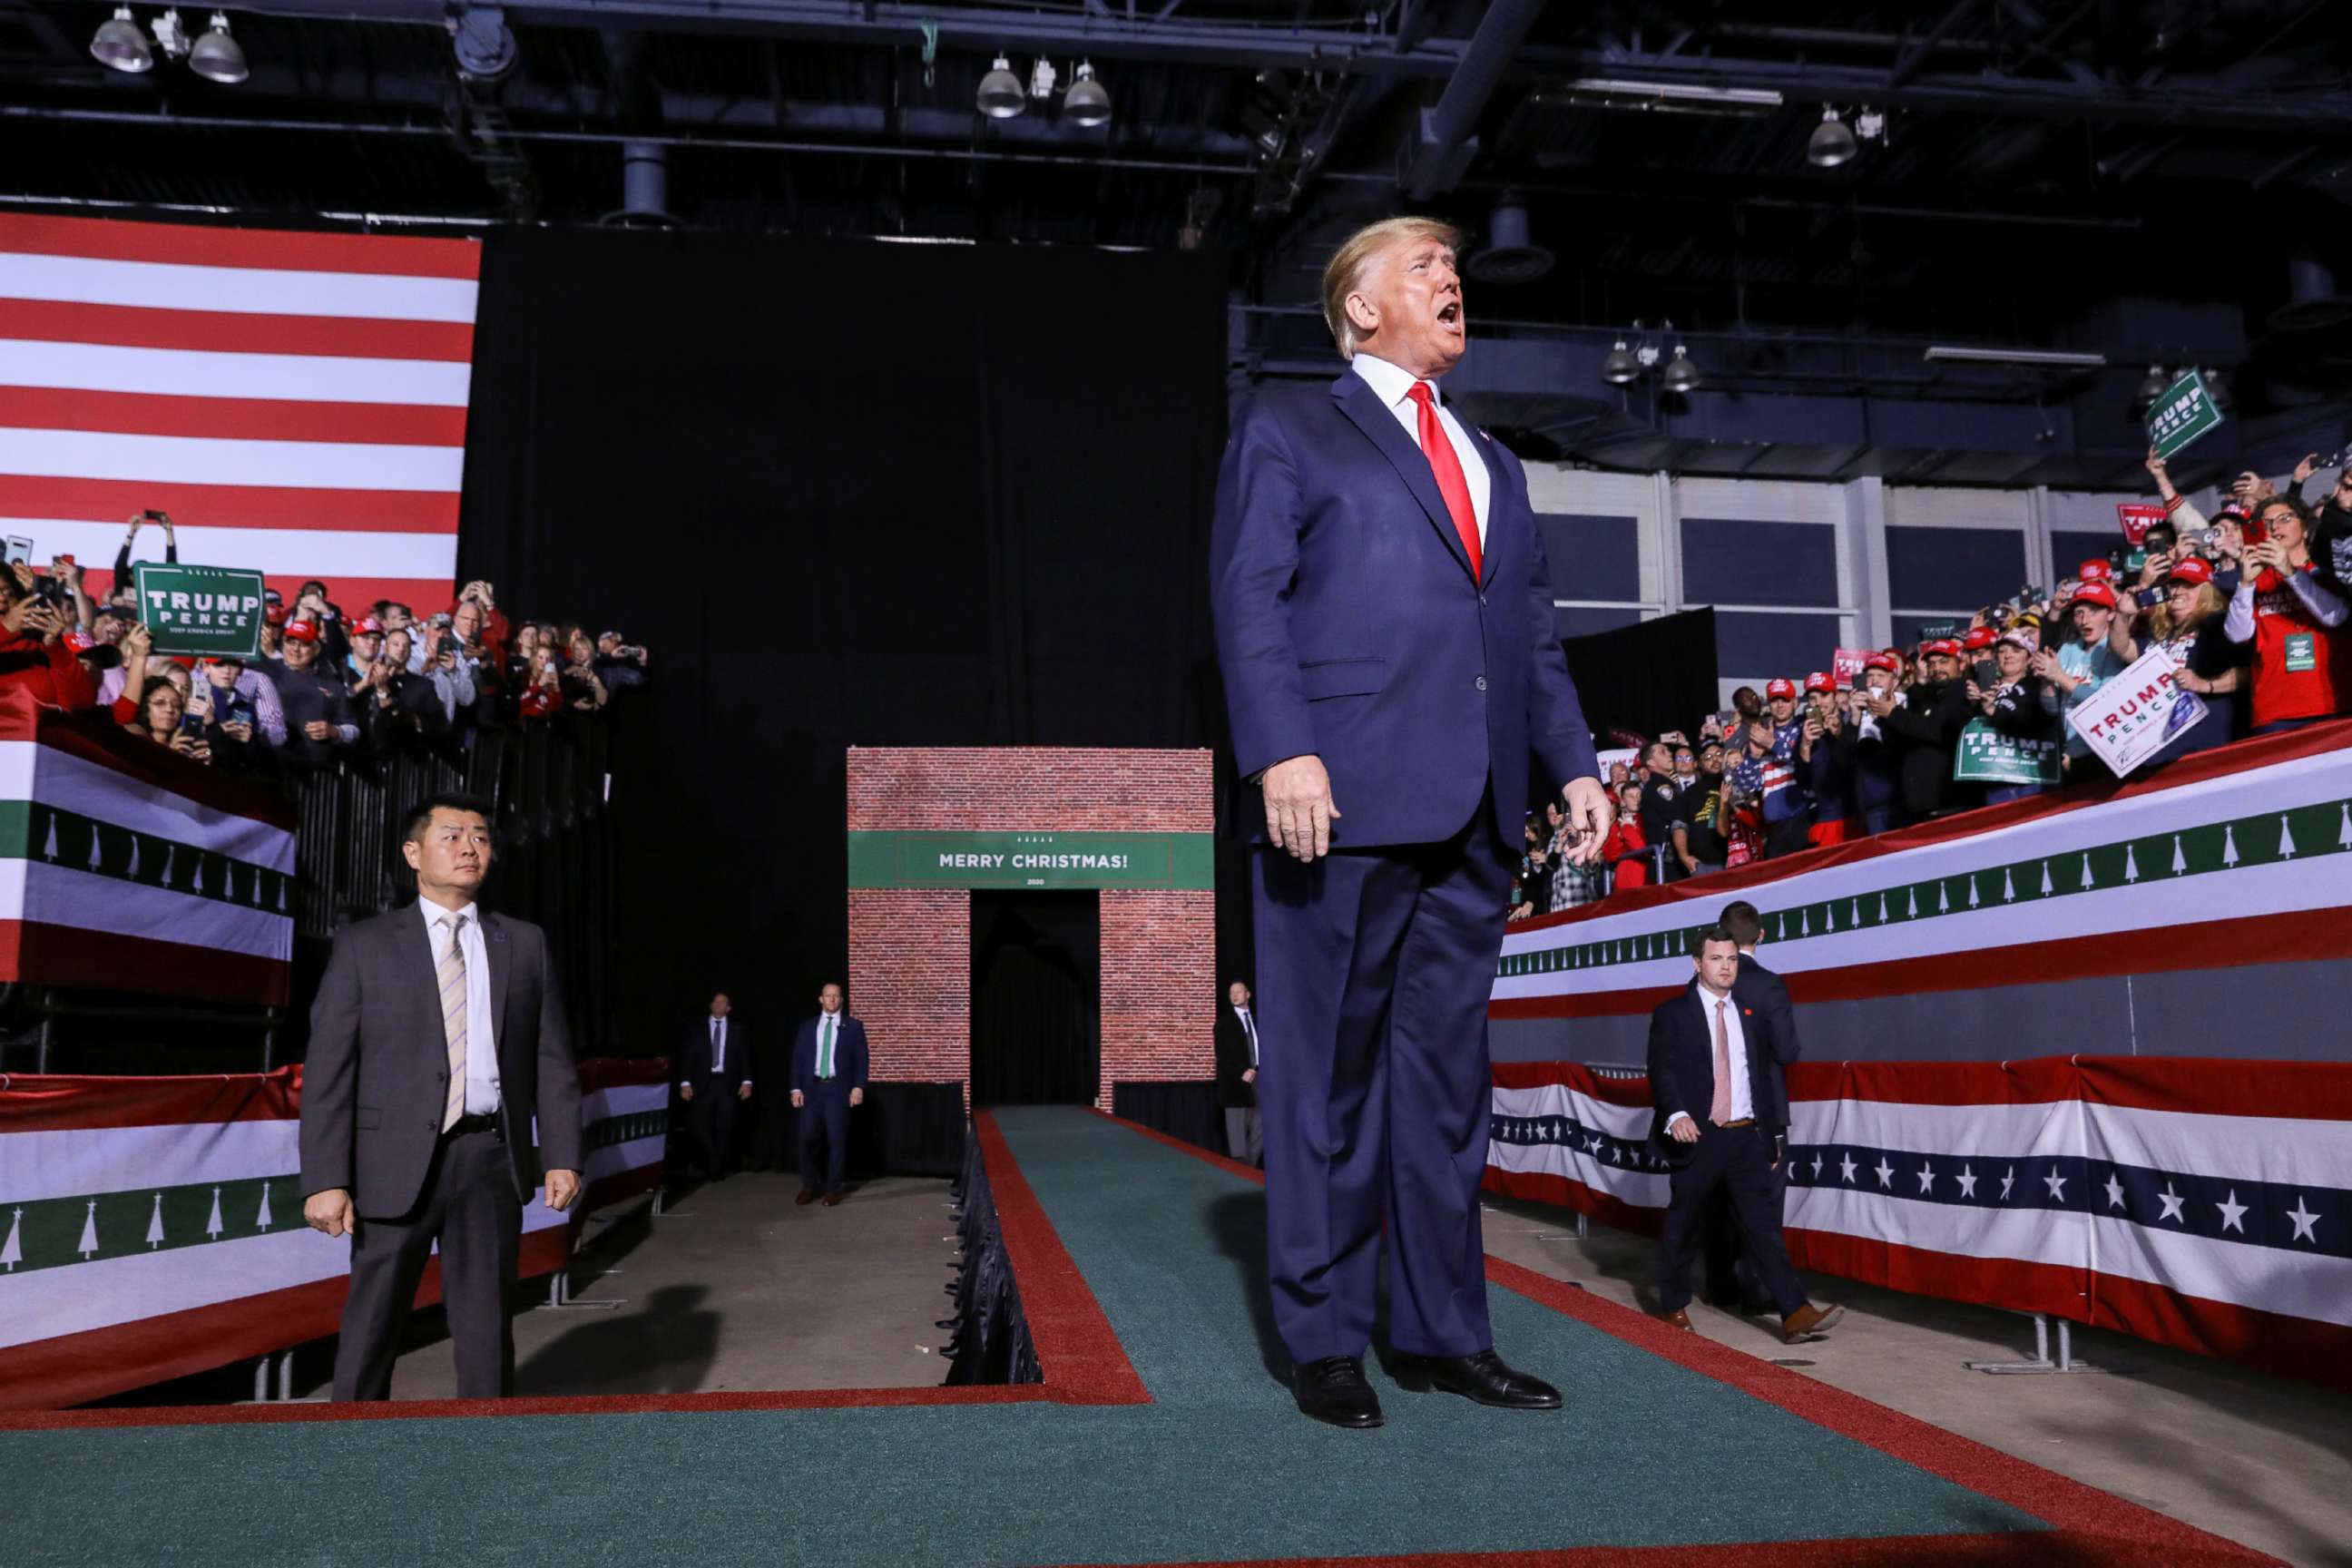 PHOTO: President Donald Trump greets supporters at a campaign rally in Battle Creek, Mich., Dec. 18, 2019.